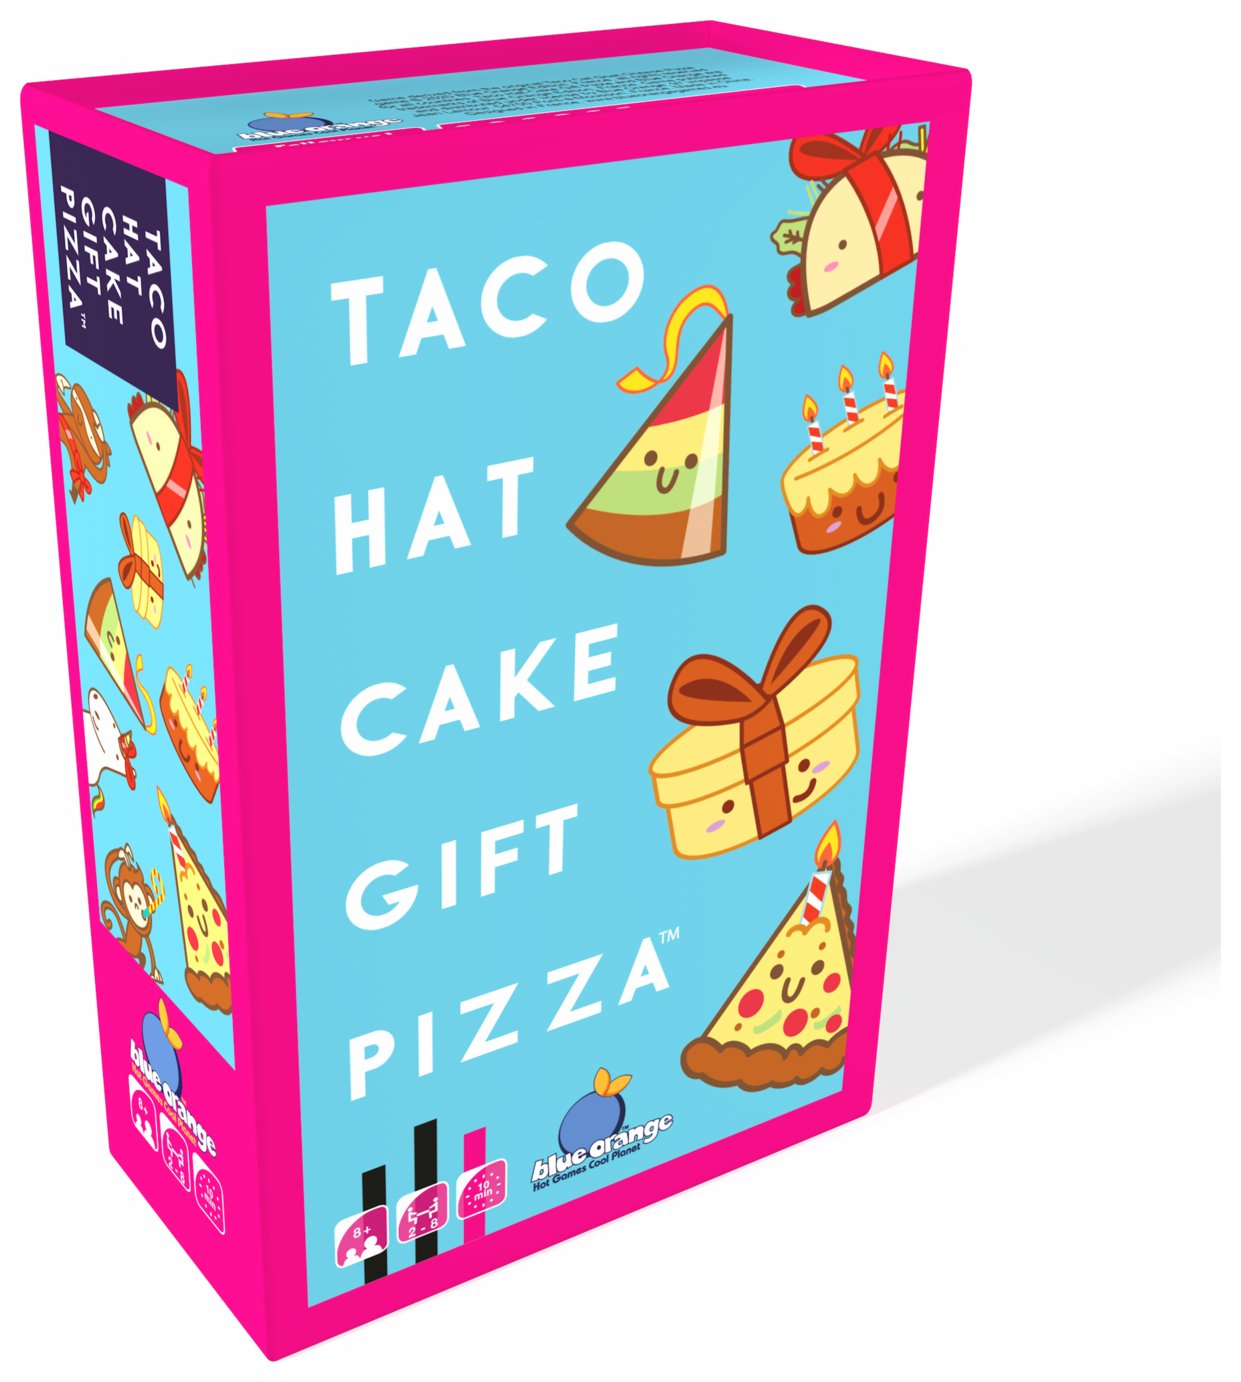 Taco Cat Cake Gift Pizza Board Game